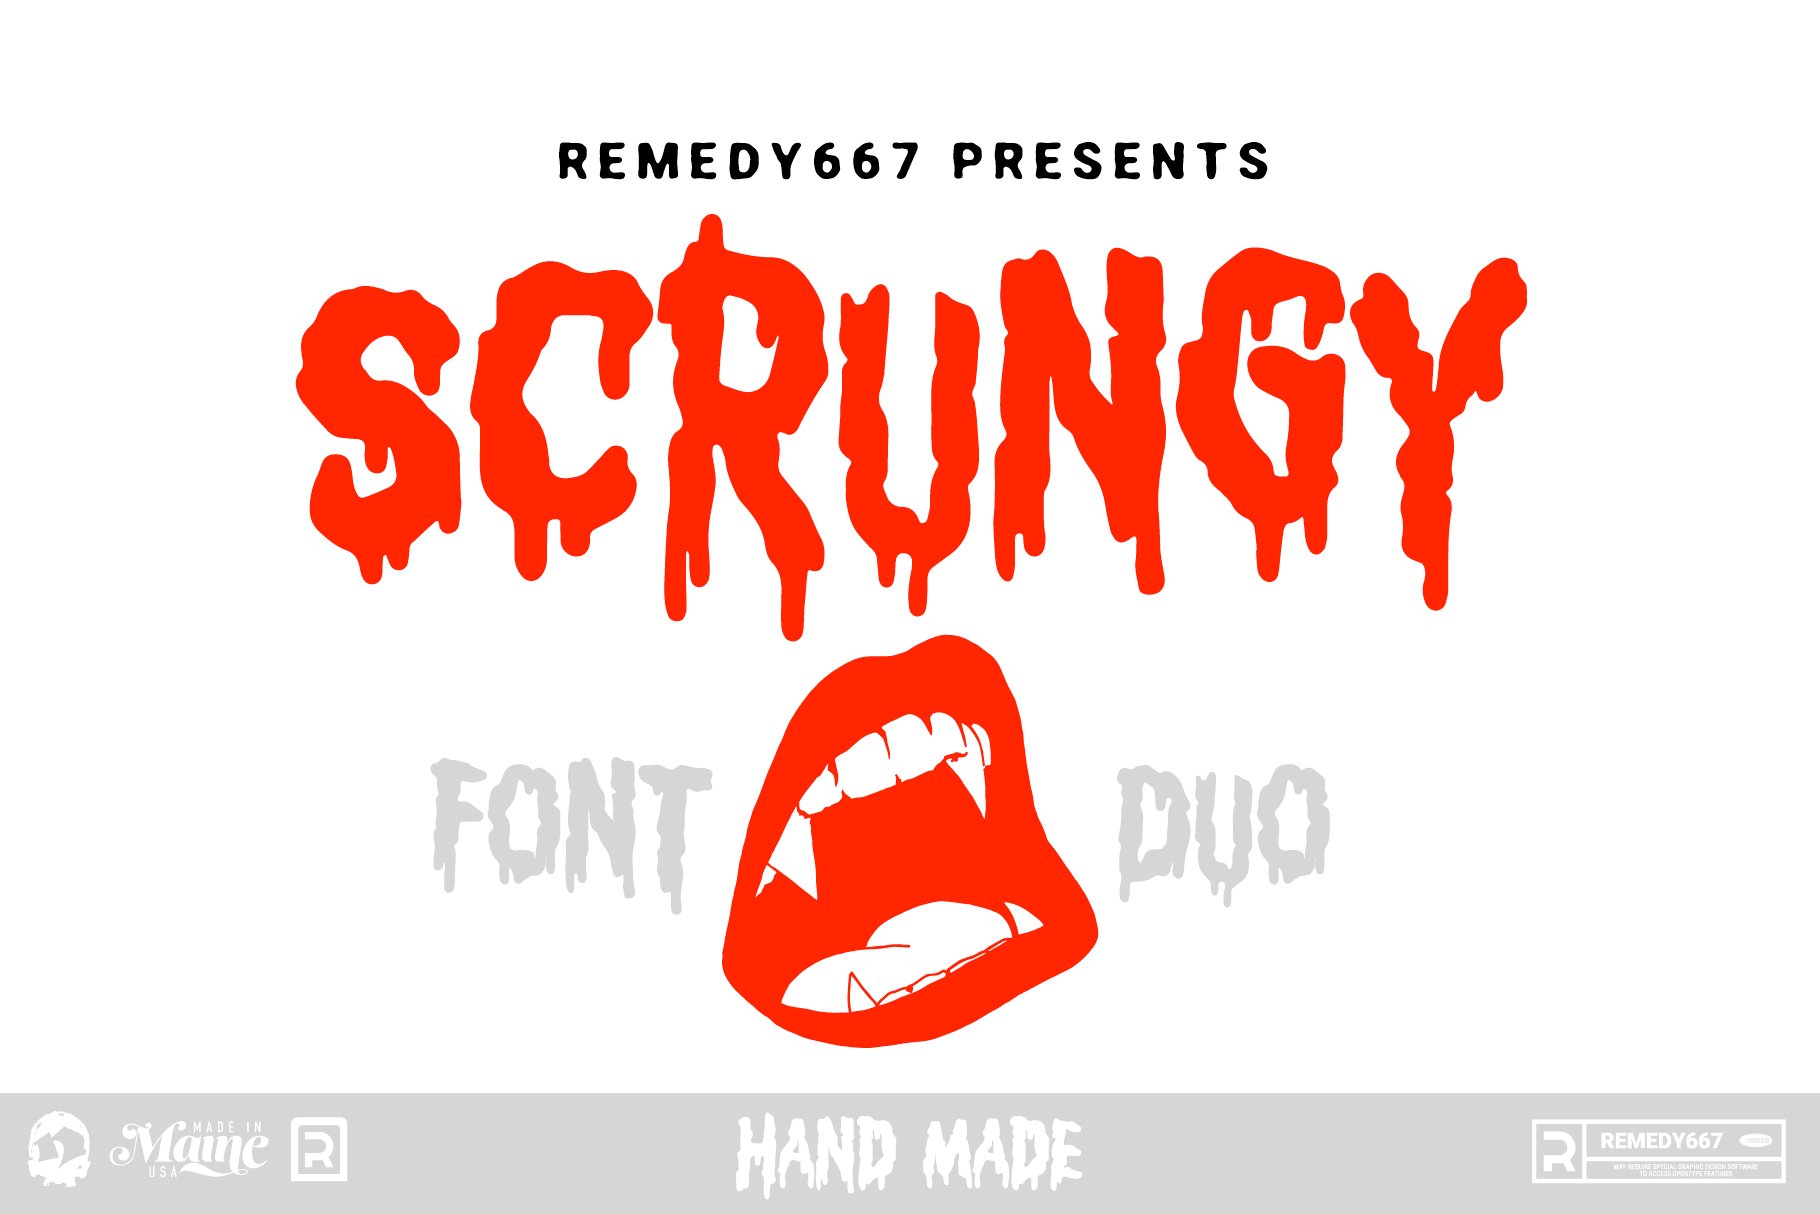 Scrungy – Font Duo cover image.